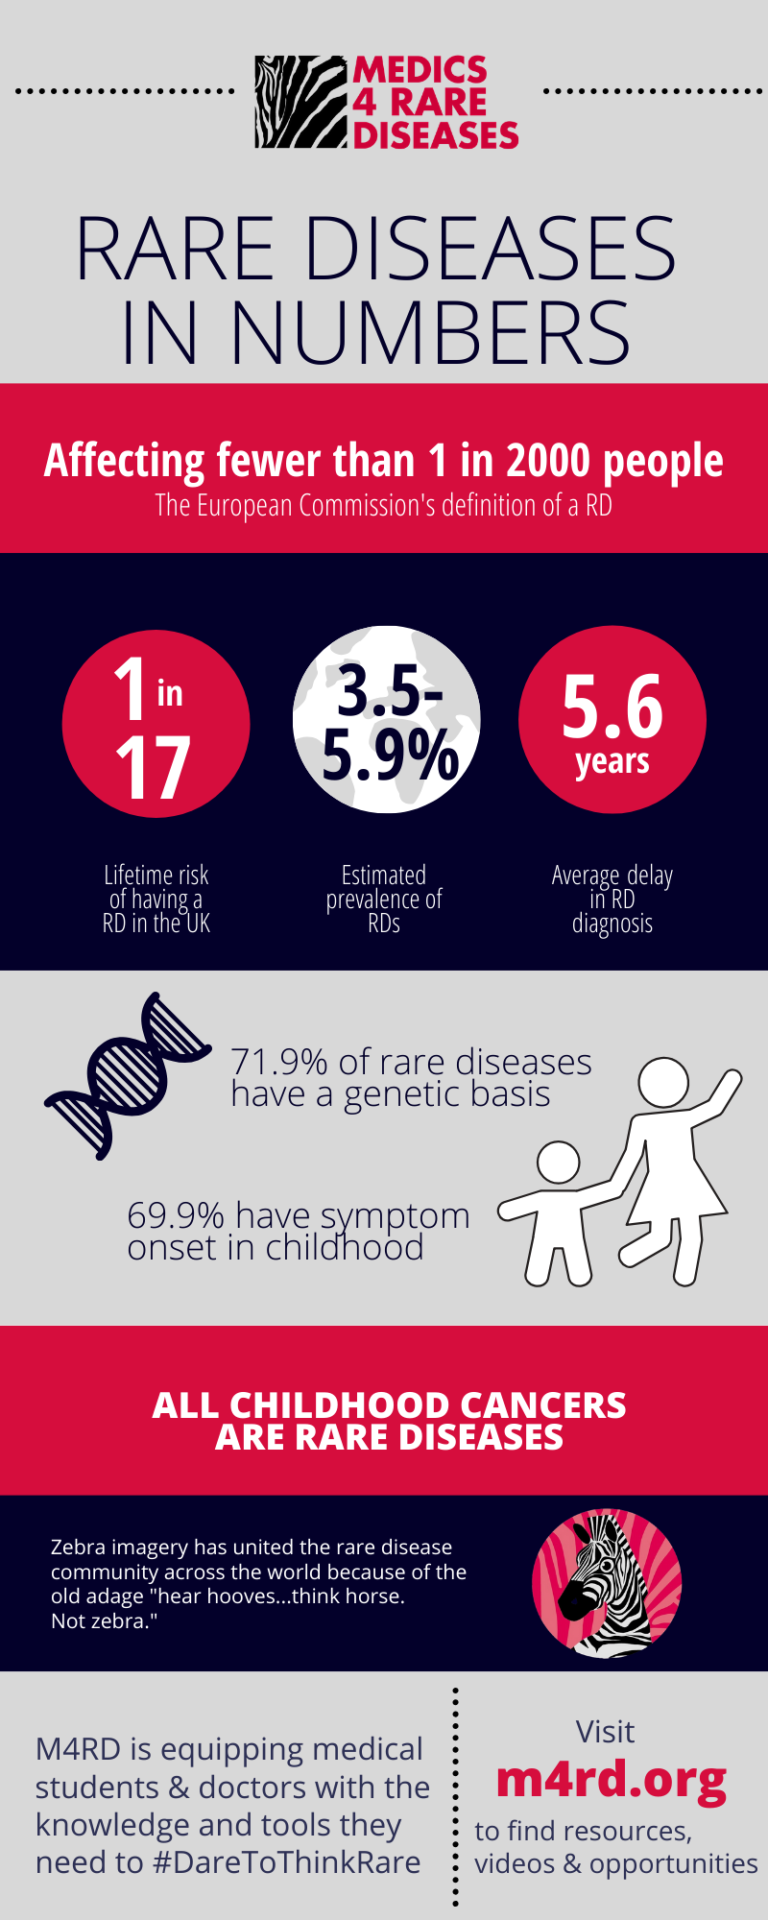 Infographic from Medics 4 Rare Disease m4rd.org Rare diseases in numbers. Affecting fewer than 1 in 2000 people. 1 in 17 lifetime risk in the UK. 3.5 - 5.9% estimated prevalence. 5.6 years average delay in diagnosis. 71.9% of rare diseases have a genetic basis. 69.9% have symptom onset in childhood. All childhood cancers are rare diseases. Zebra imagery has united the rare disease community.